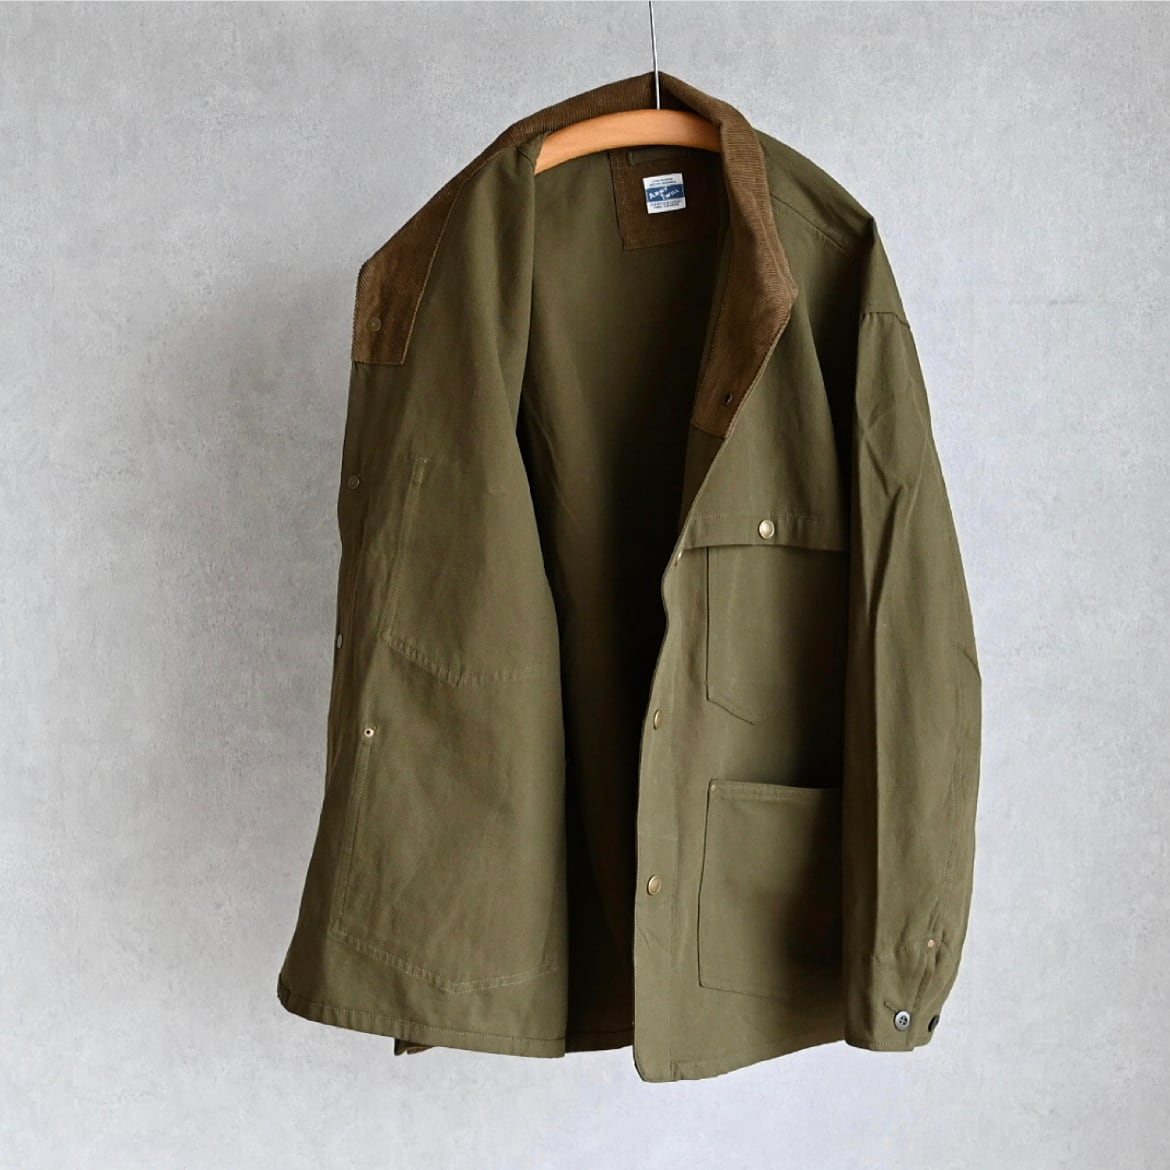 ARMY TWILL】COTTON DUCK LOGGER JACKET アーミーツイル コットン